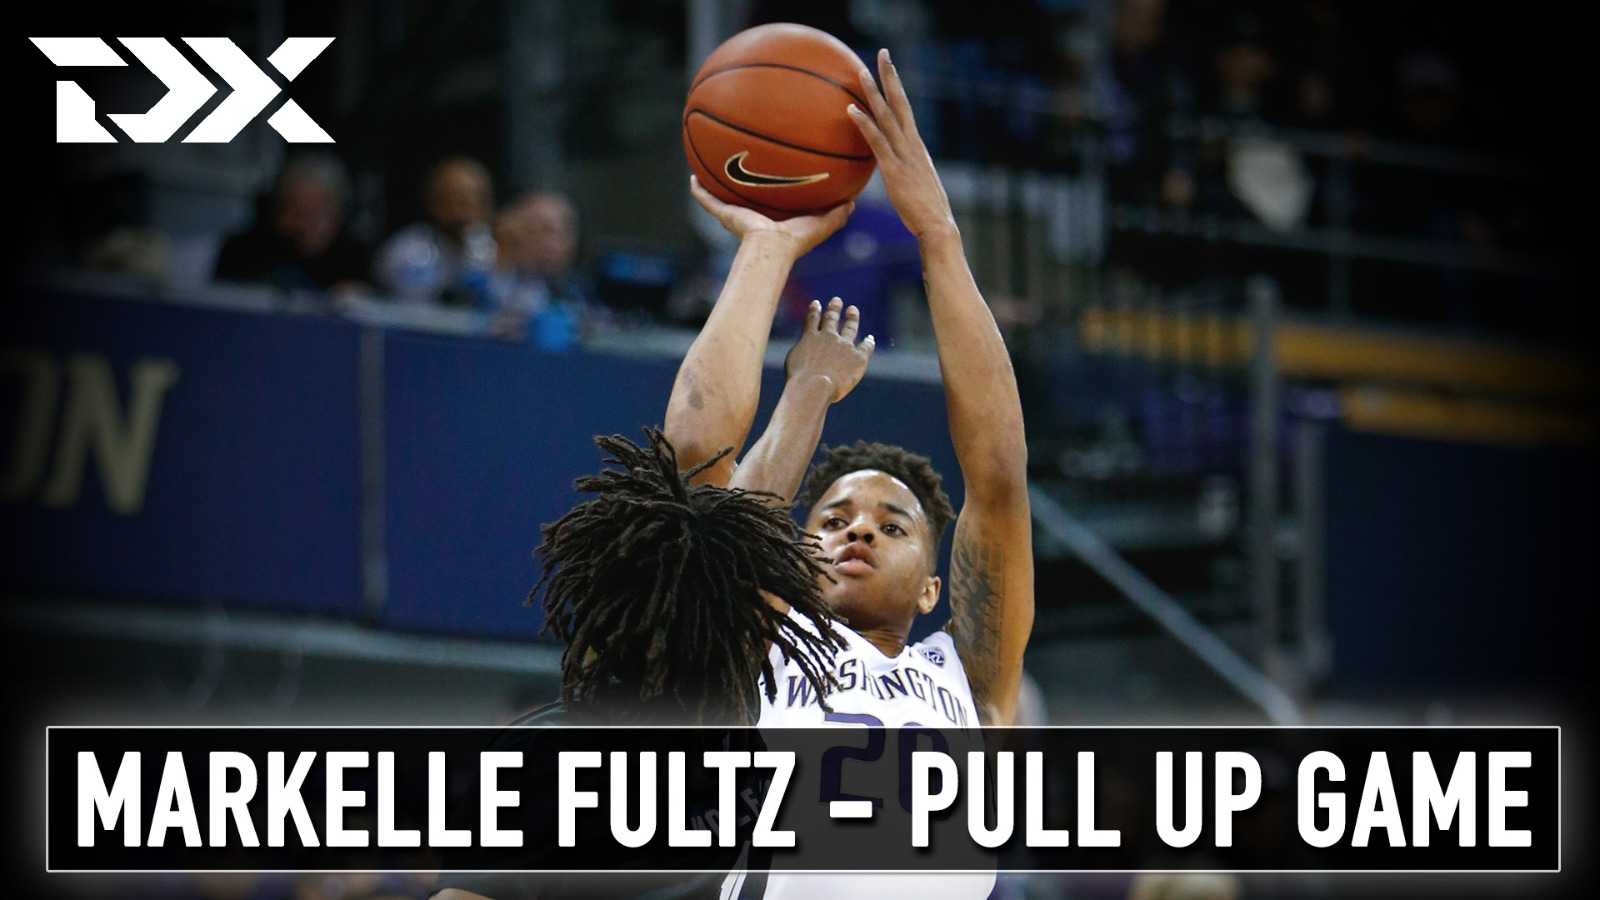 Markelle Fultz - Pull Up Game